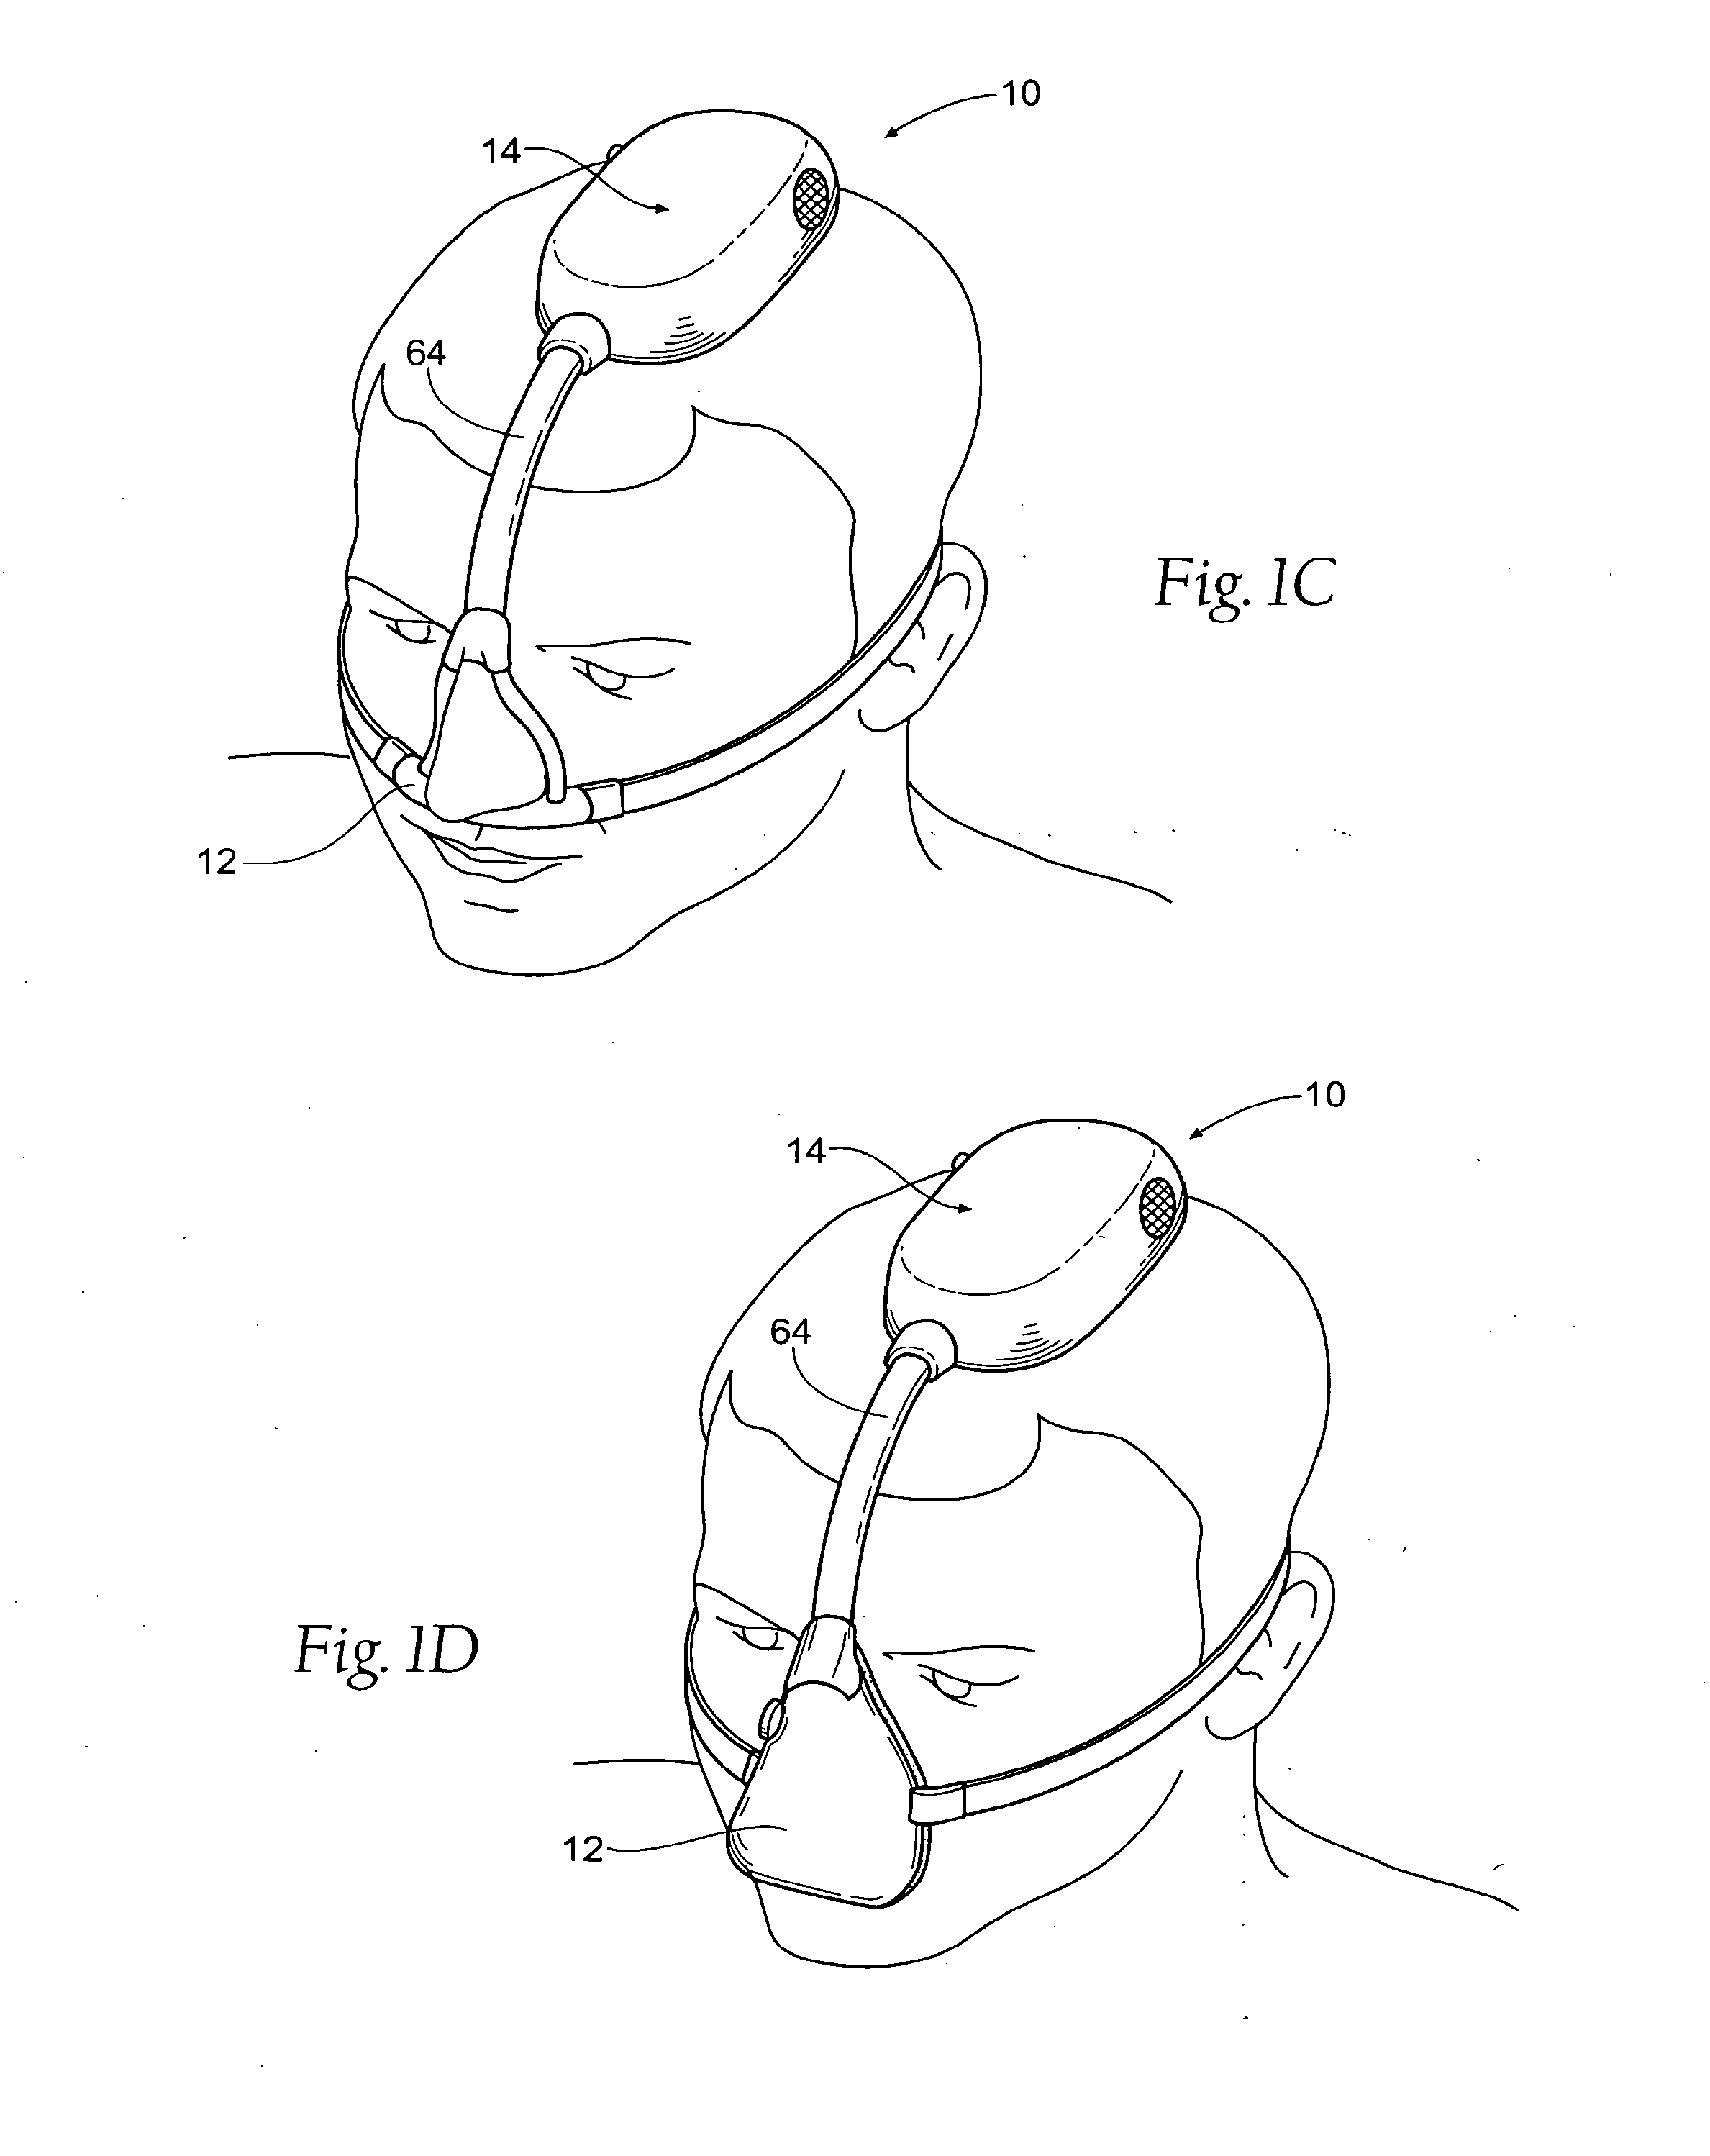 Self-contained, intermittent positive airway pressure systems and methods for treating sleep apnea, snoring, and other respiratory disorders